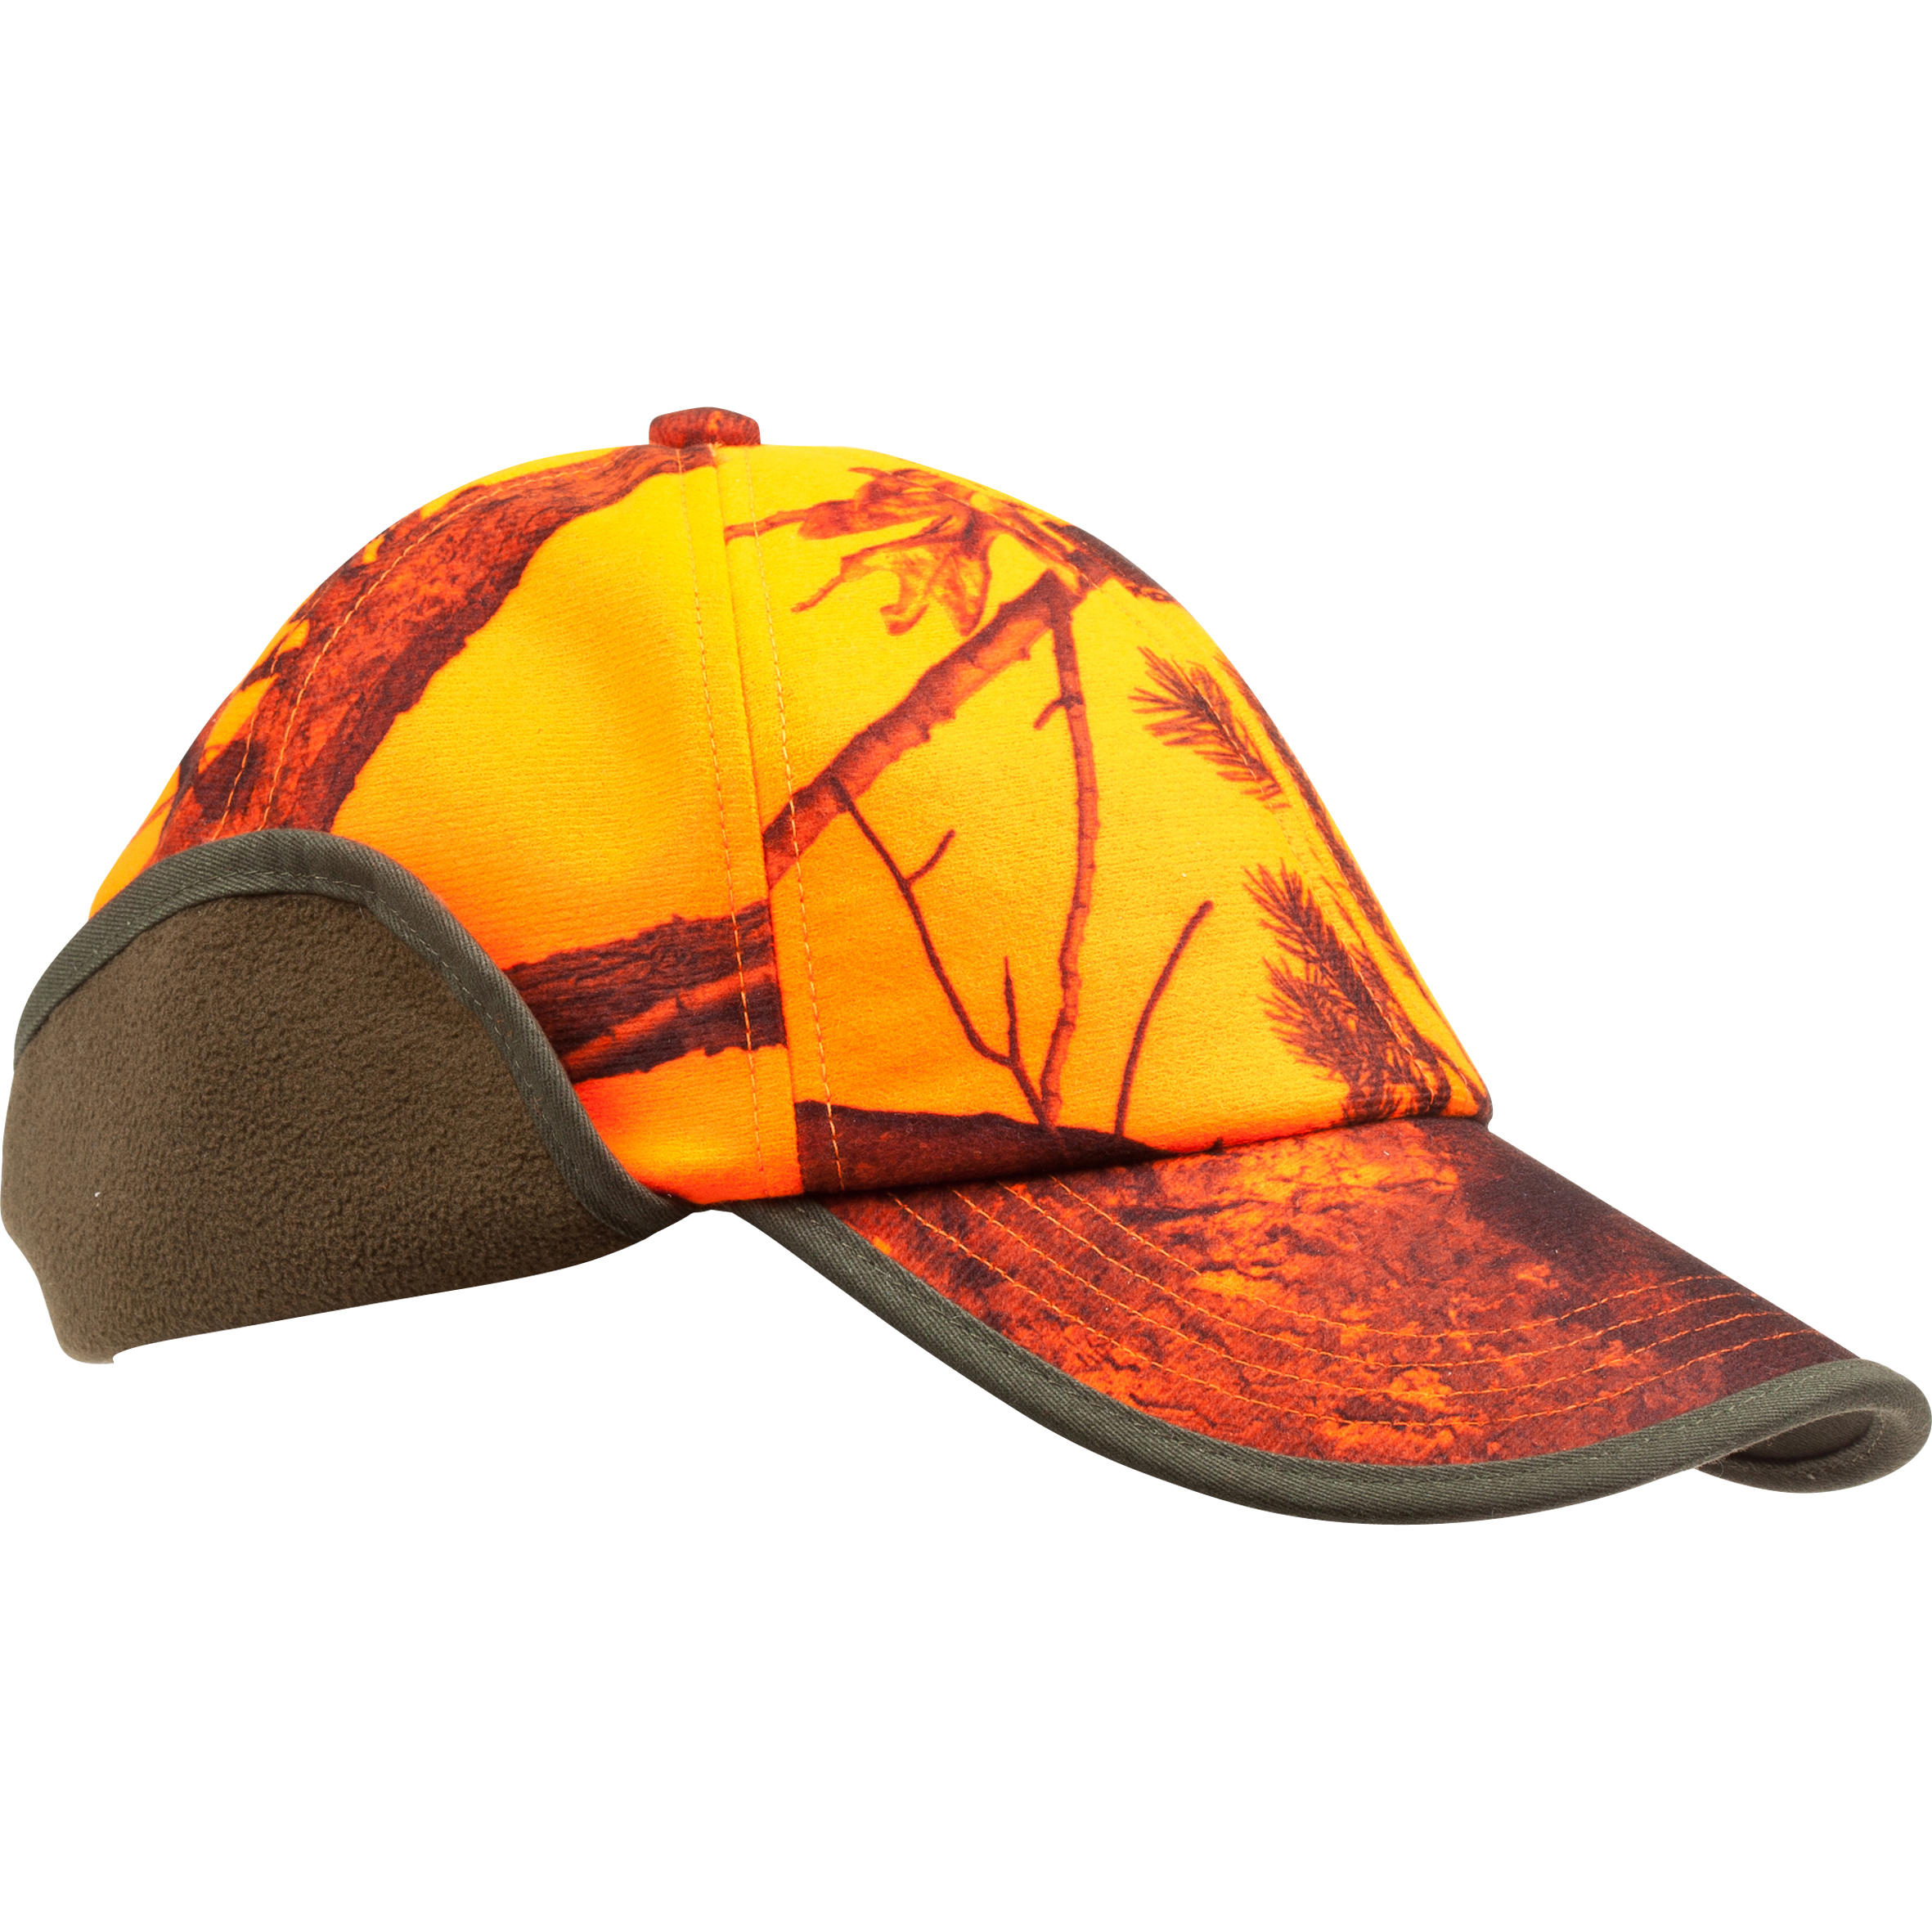 Hunting Cap With Ear Flaps Orange ?format=auto&f=720x720